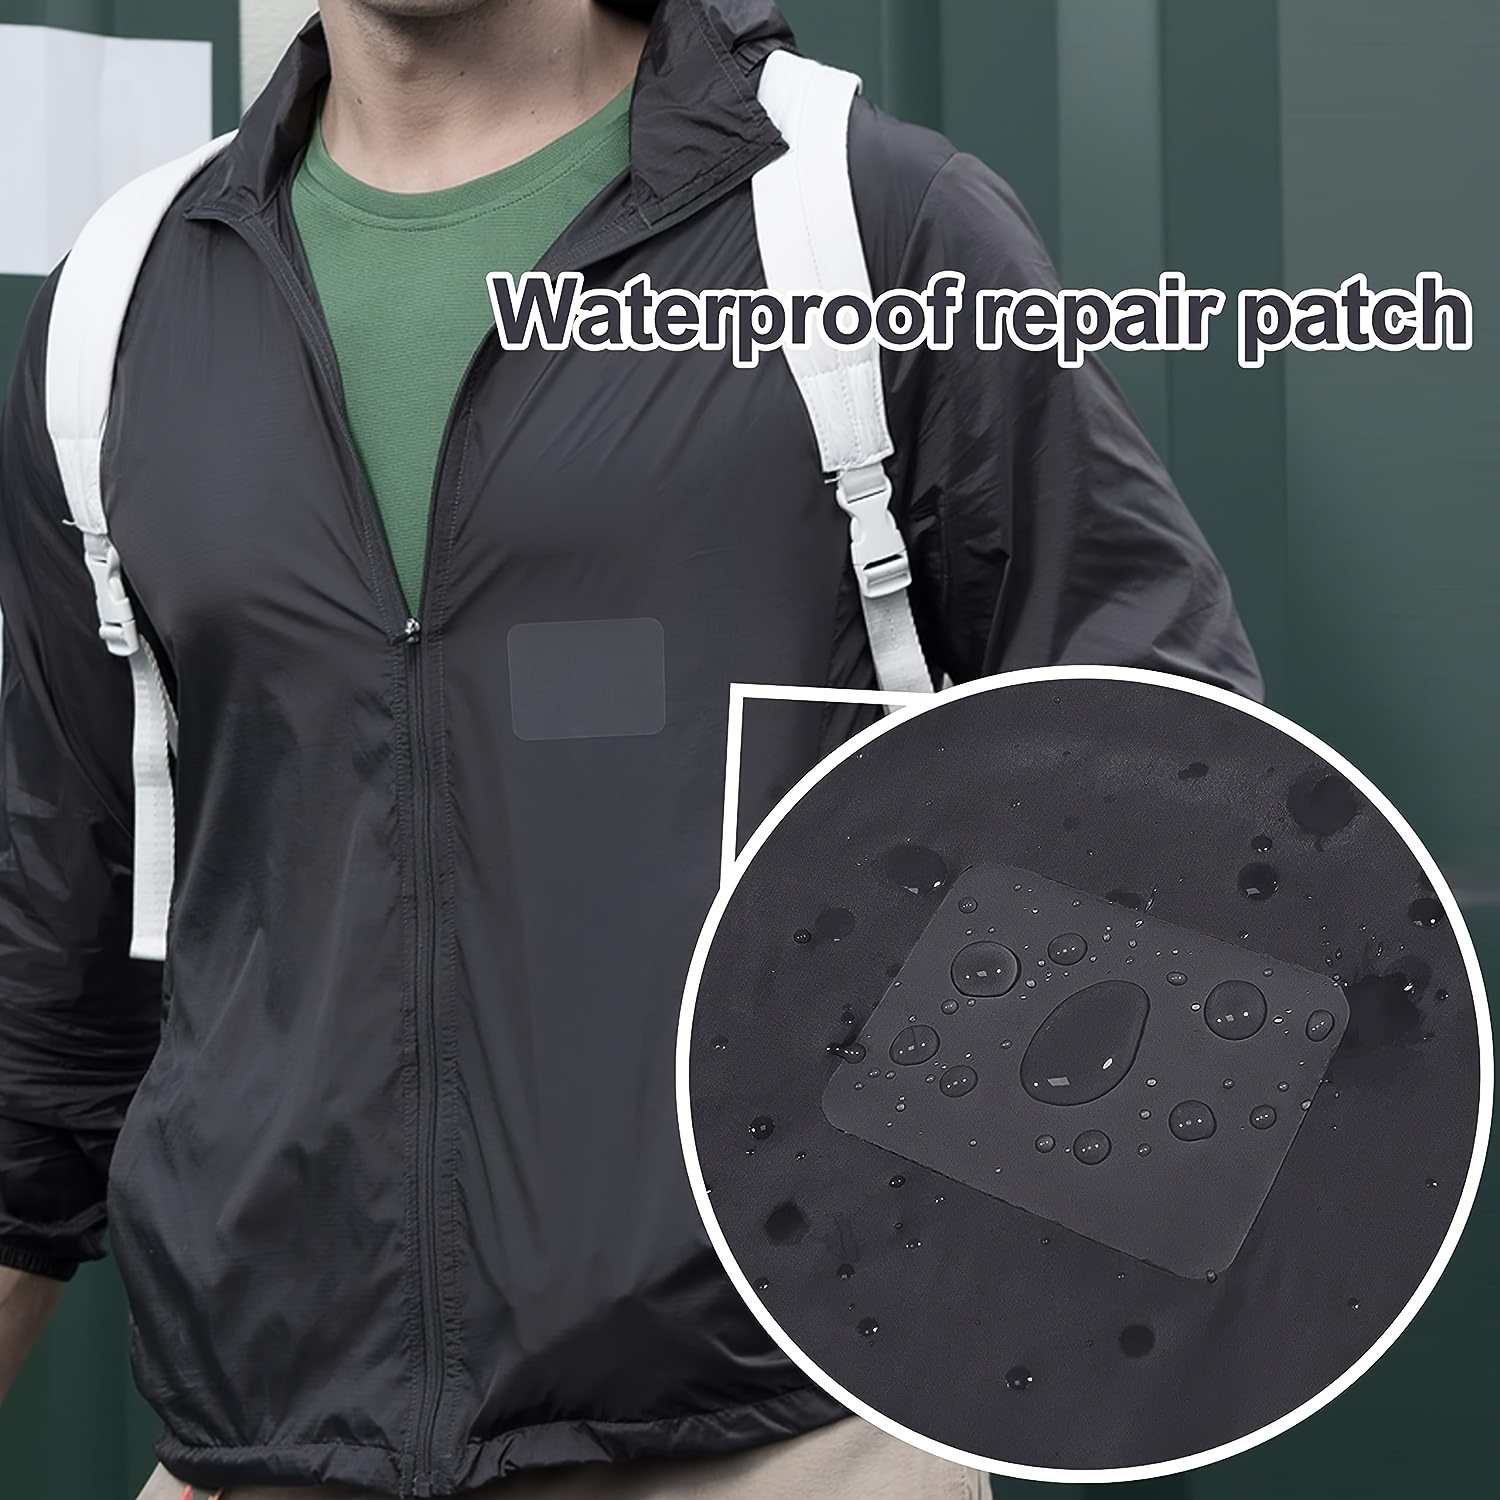 64 Pcs Puffer Down Jacket Repair Patch Kit, Nylon Fabric Repair Patch Self  Adhesive Waterproof Stick On Patches Tape for Coat Clothing Tent Sleeping